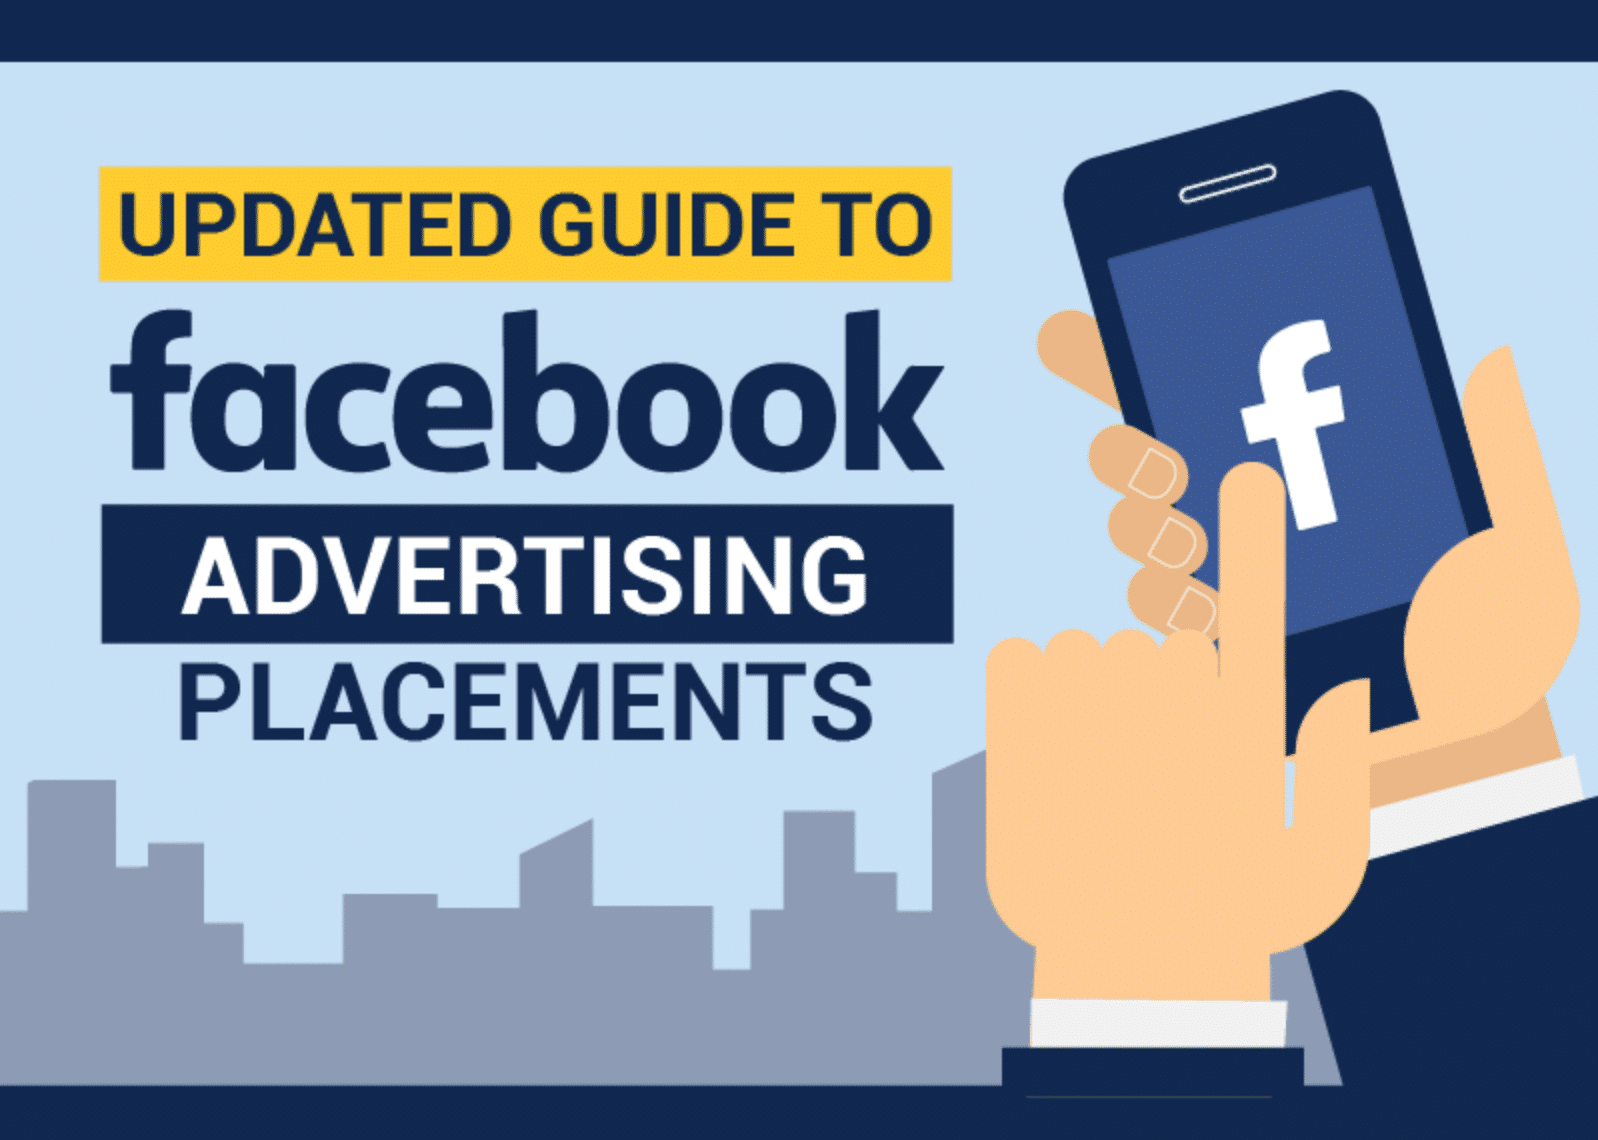 Facebook Ad Infographic What Do You Need To Know?